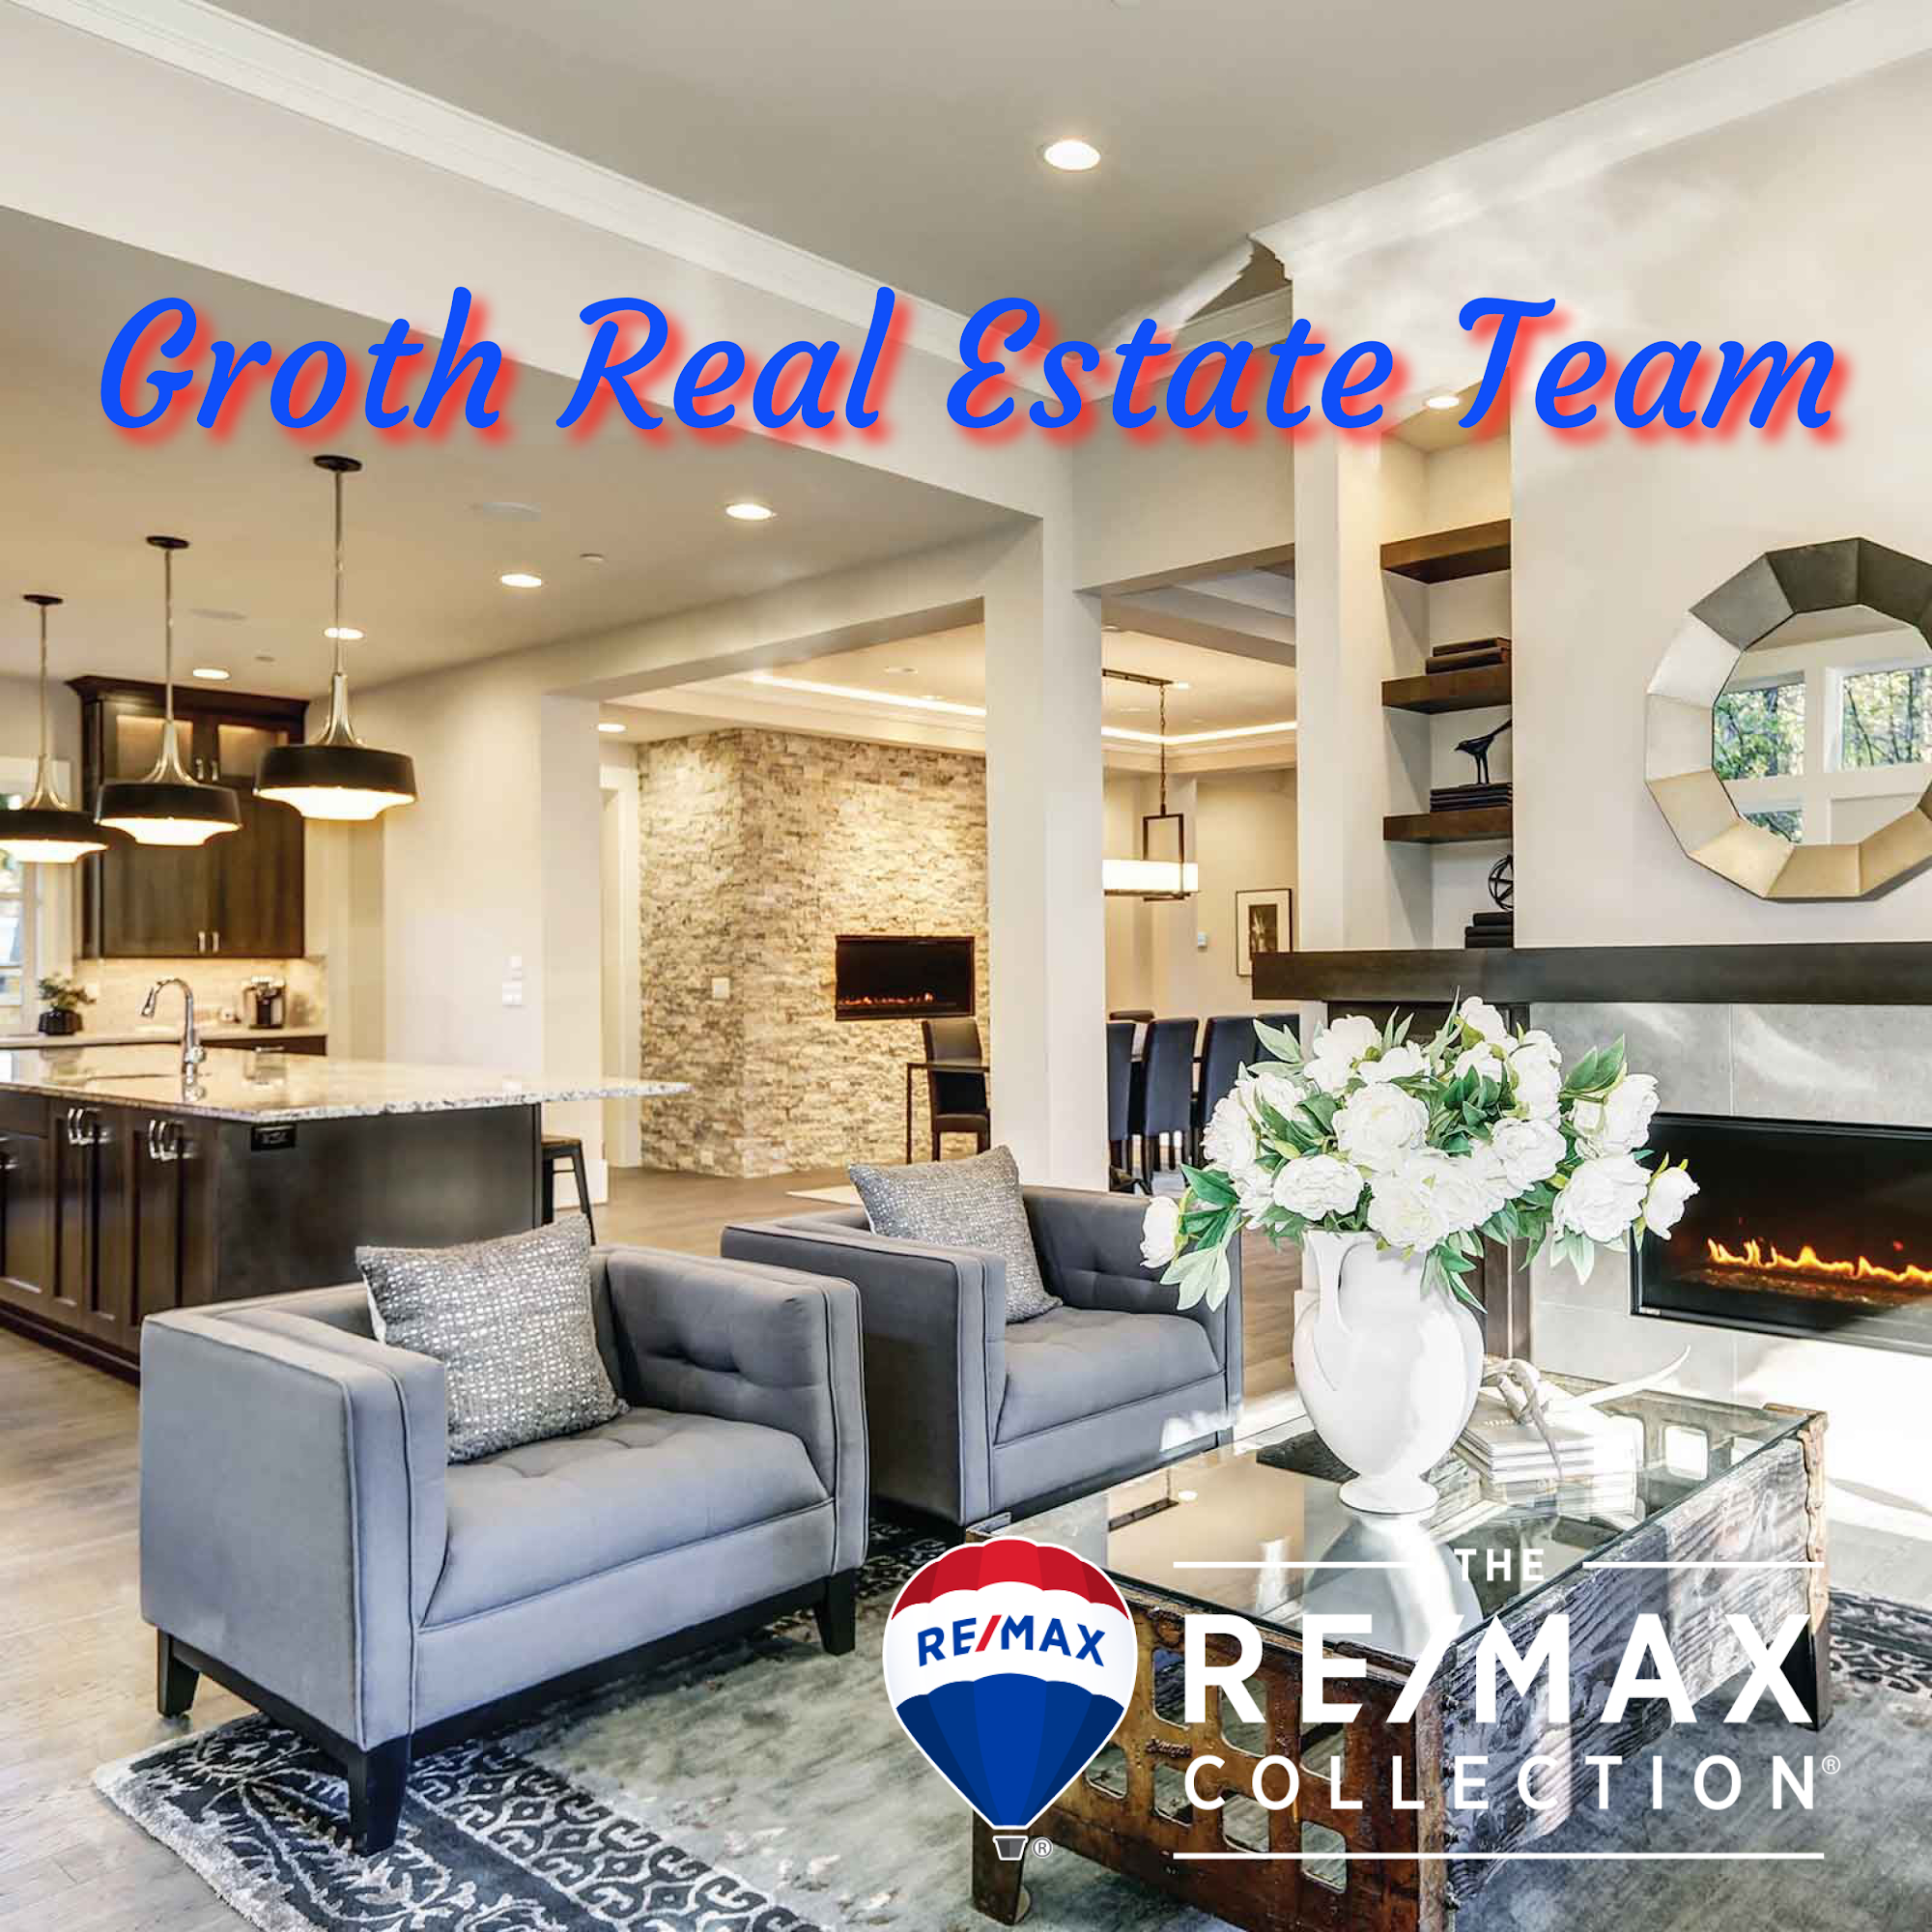 RE/MAX Gold- Groth Real Estate